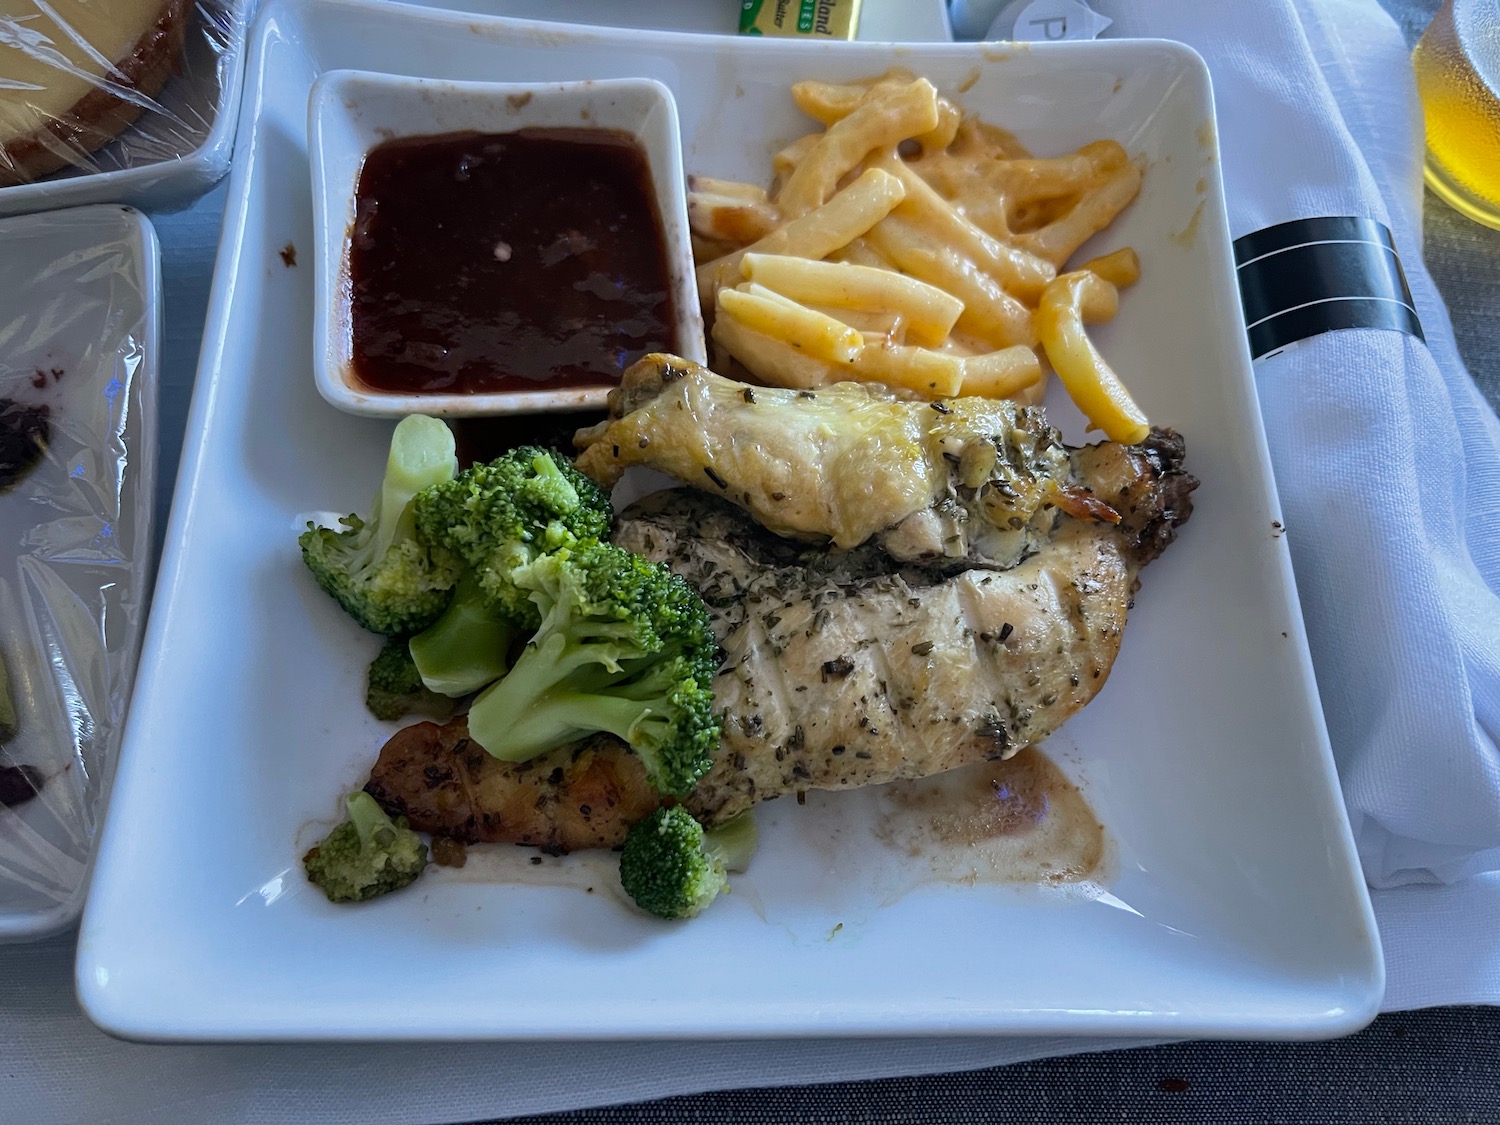 a plate of food with sauce and fries